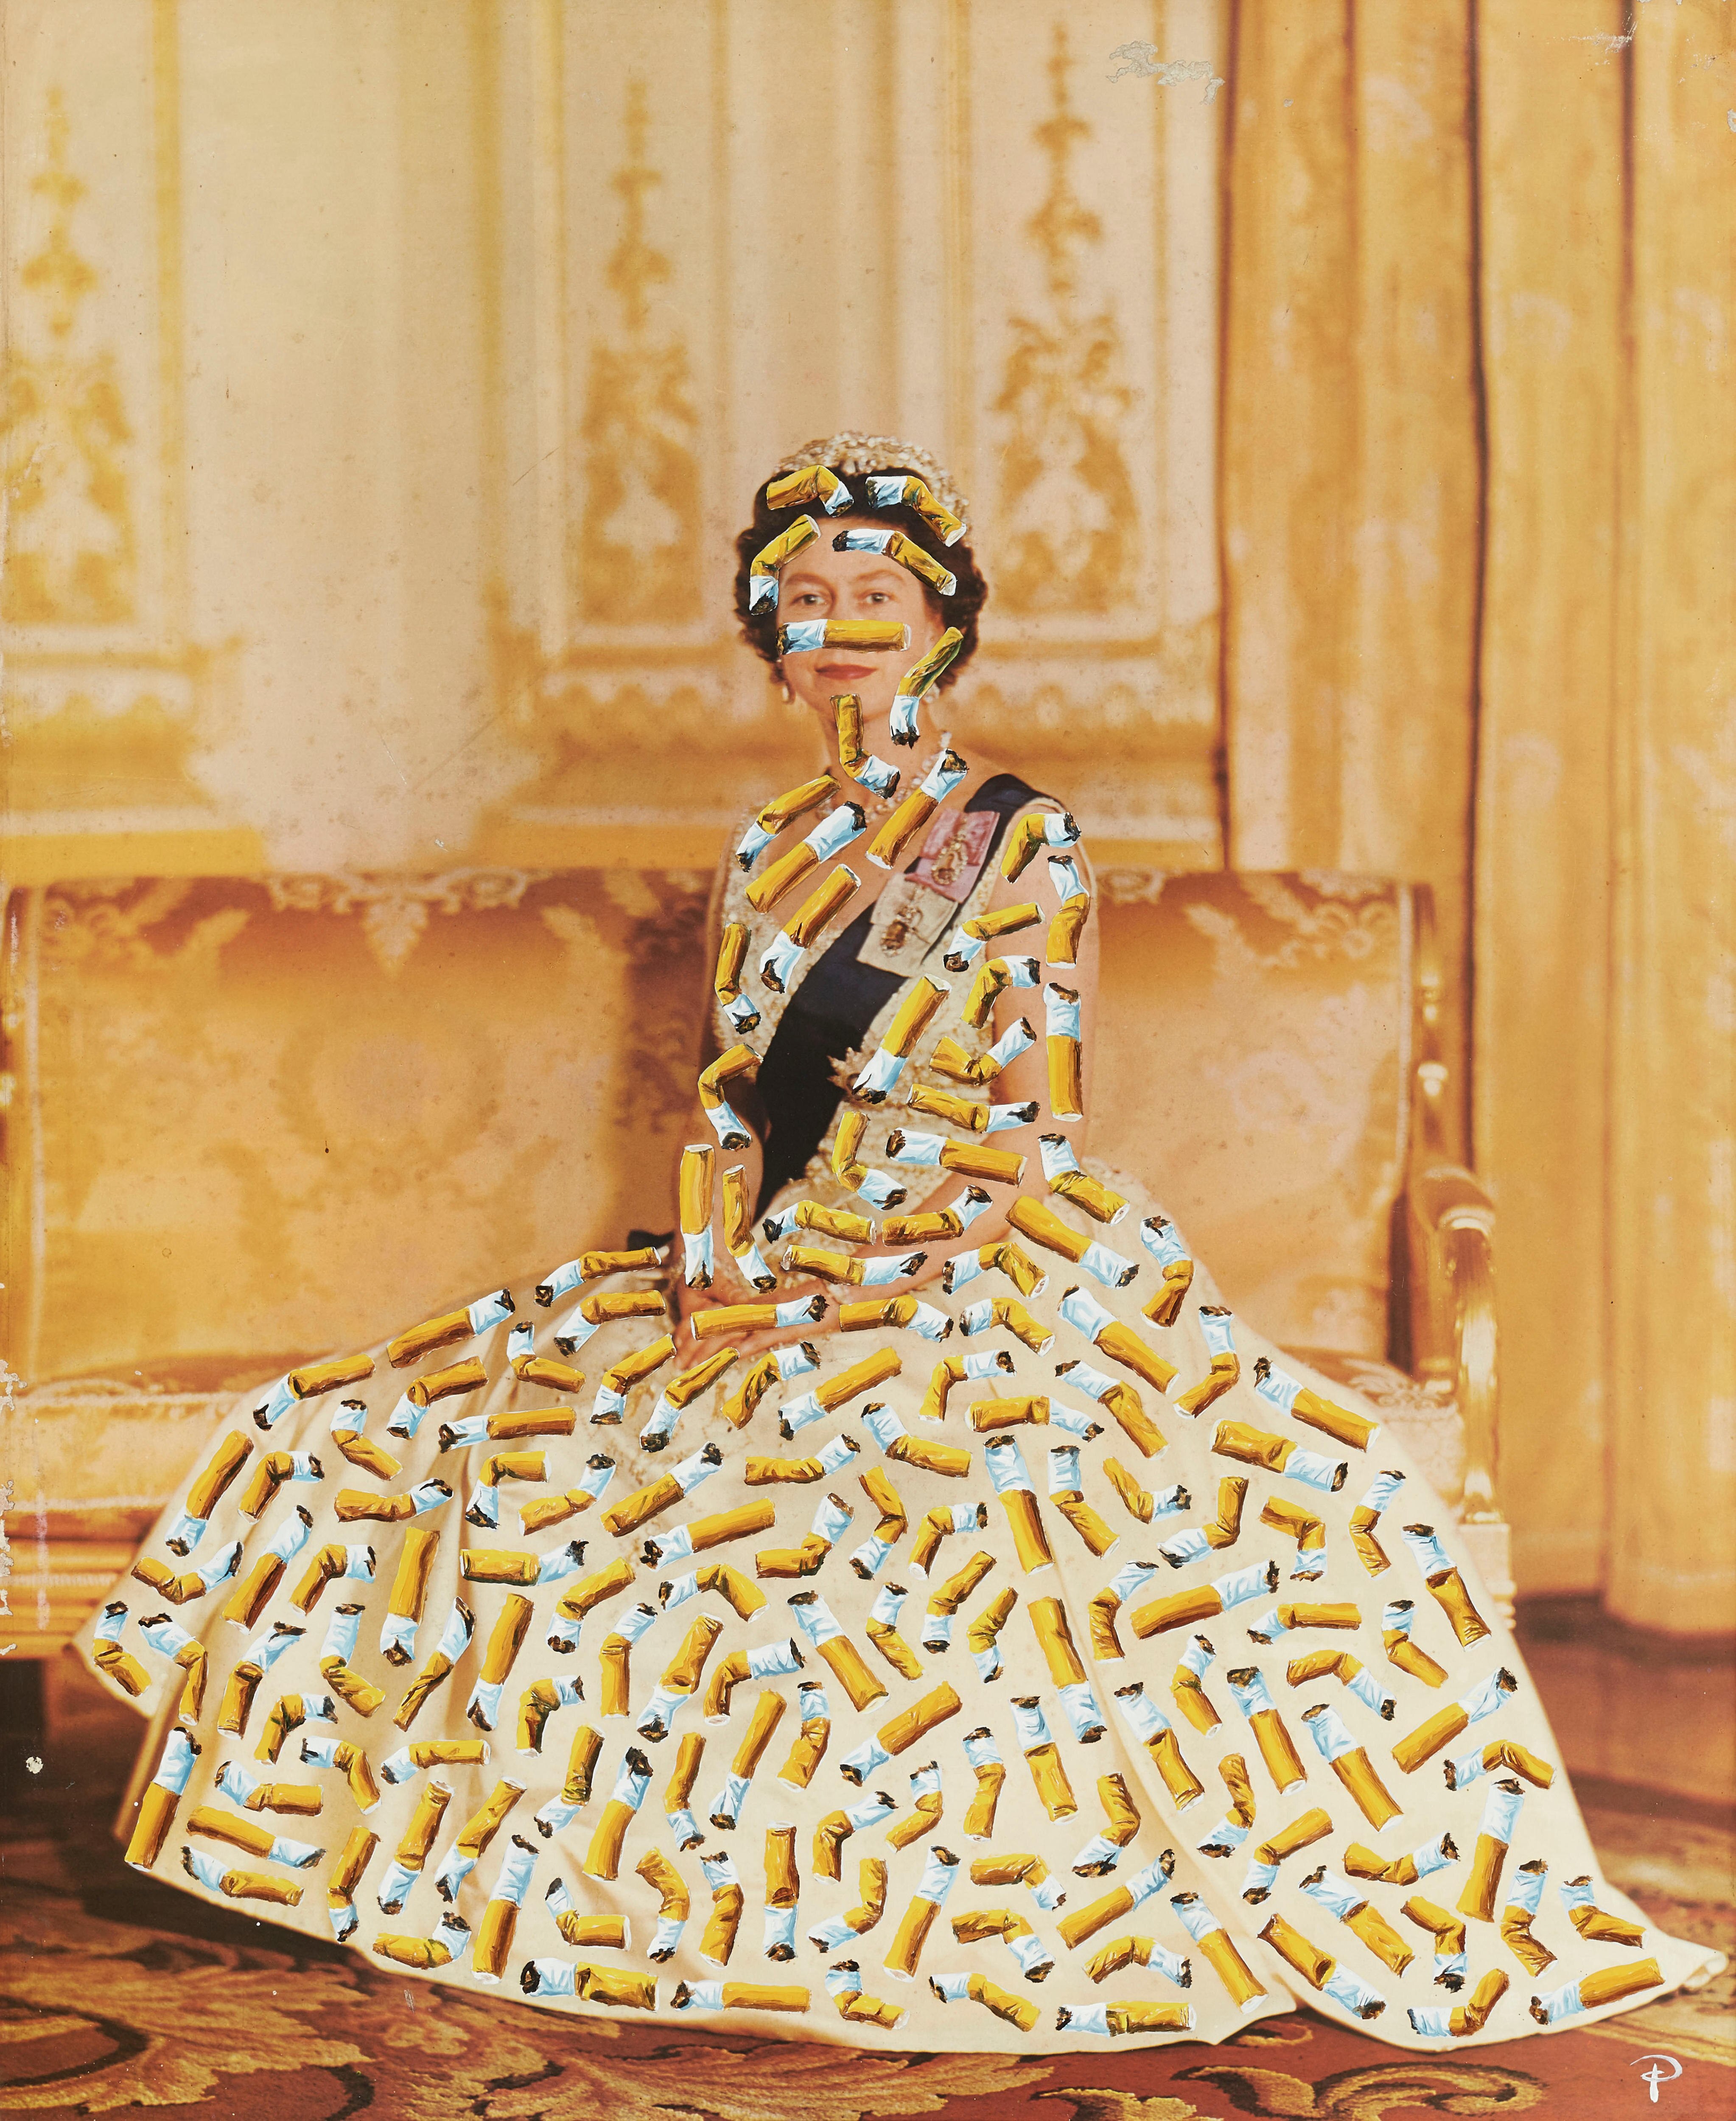 A painting of The Queen is covered in painted cigarette butts